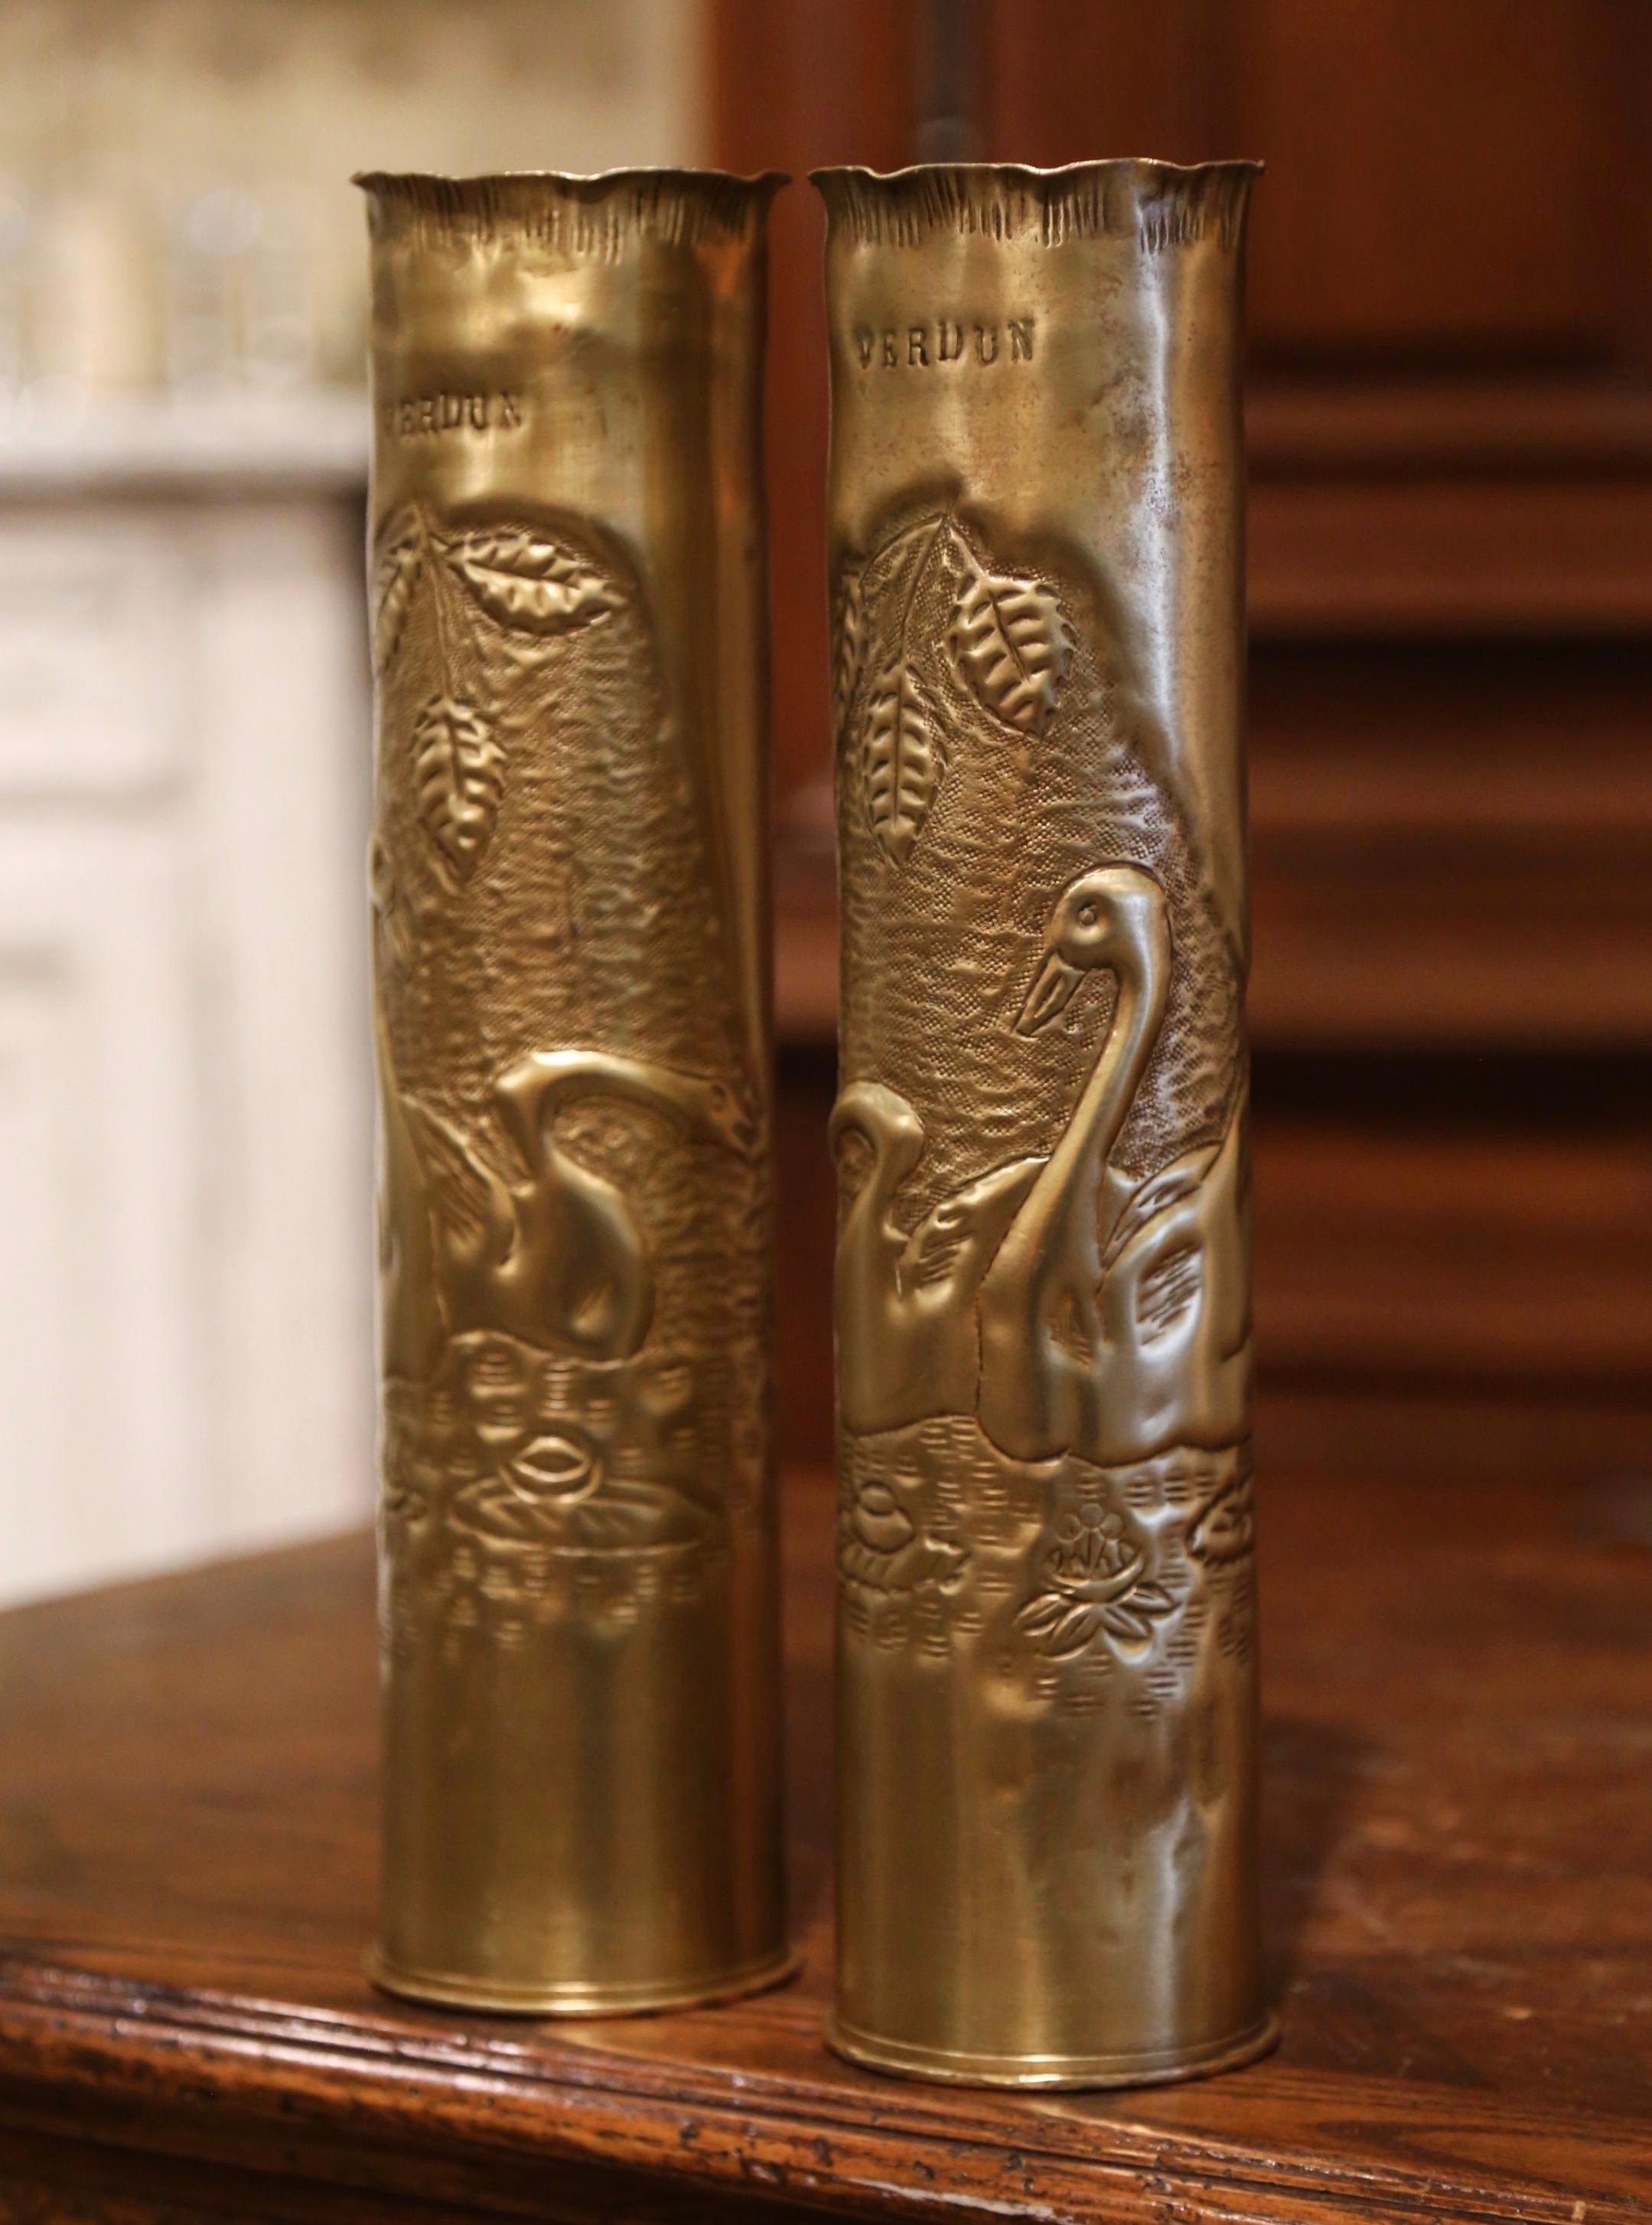 Decorate a man's office or a study display shelf with this pair of antique trench art shell vases from 